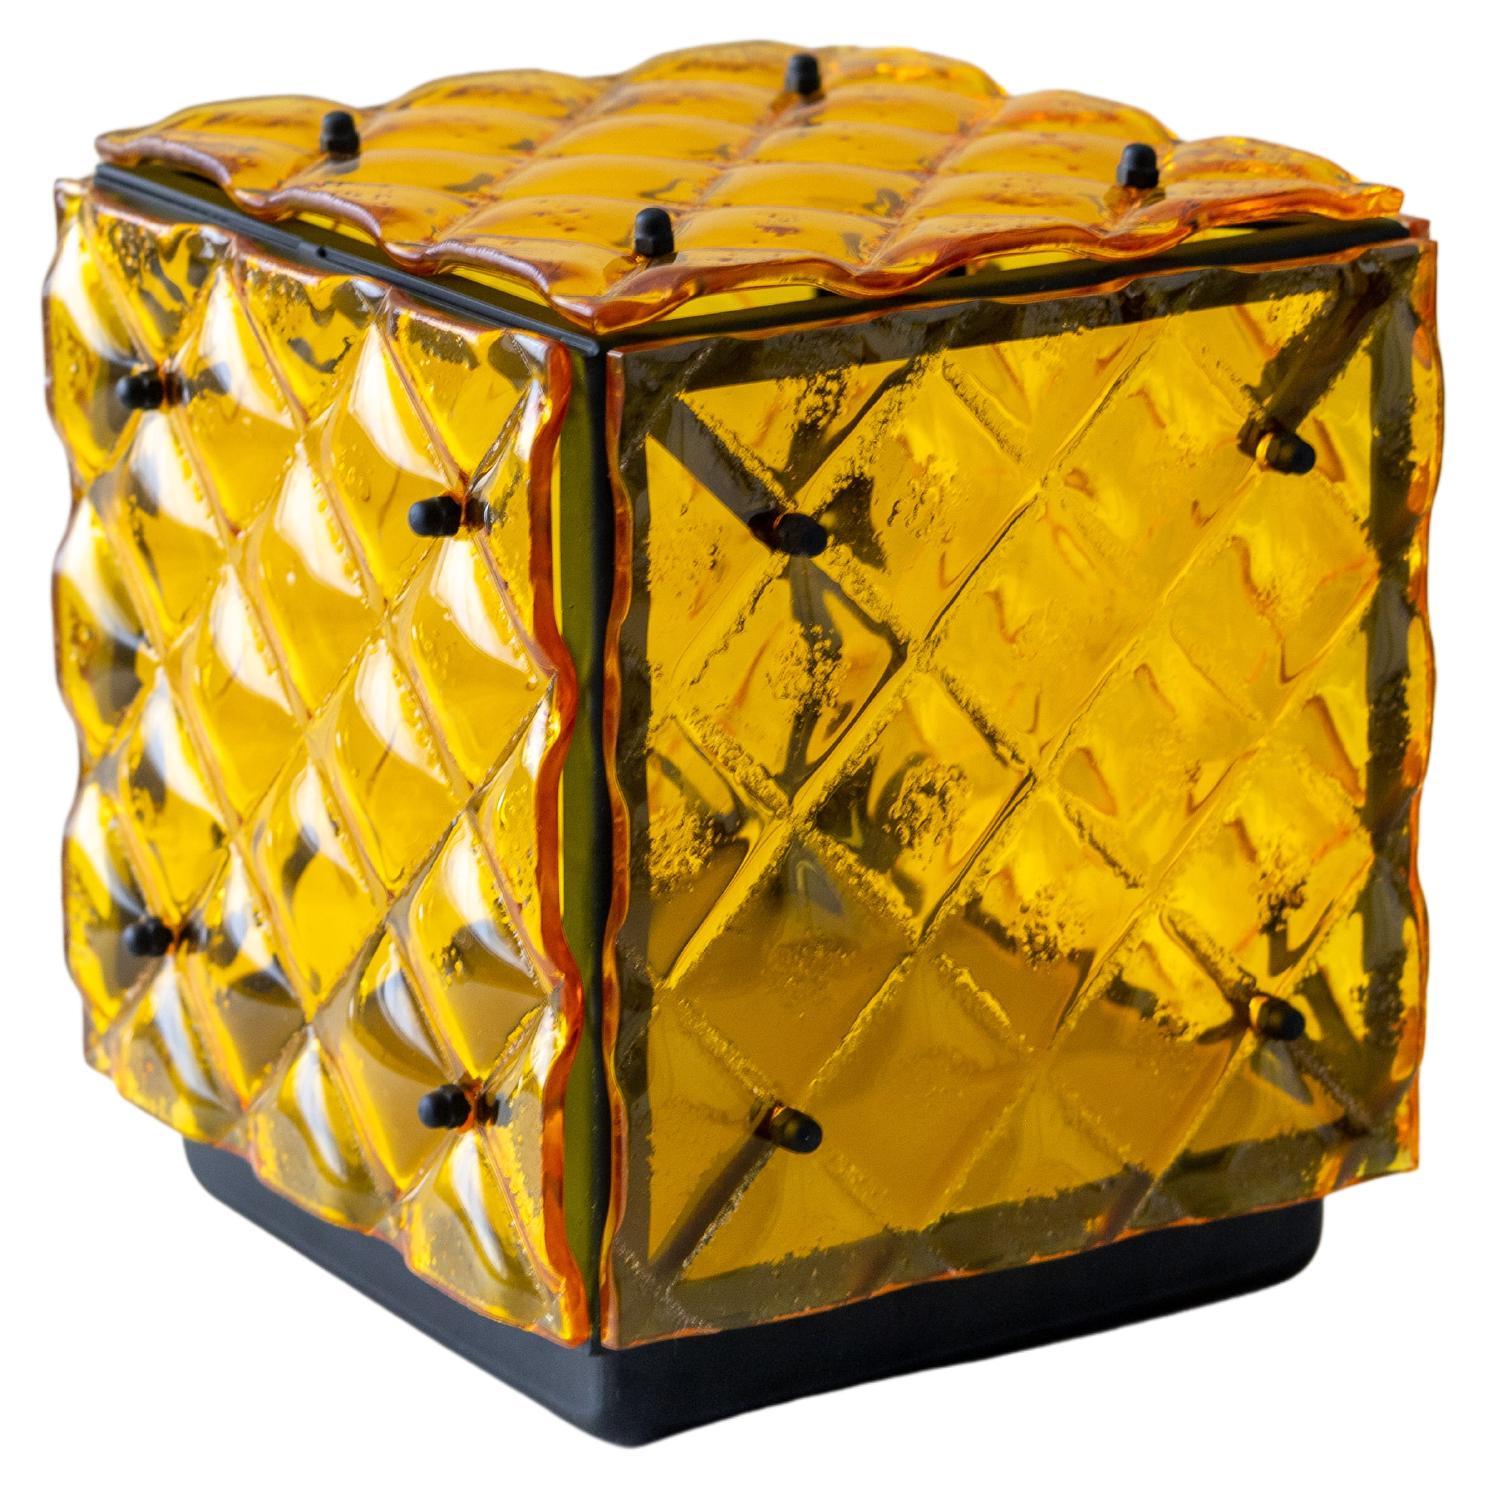 Glass Cube Lamp Yellow Ambient Light Artisanal Fused Glass Contemporary Design For Sale